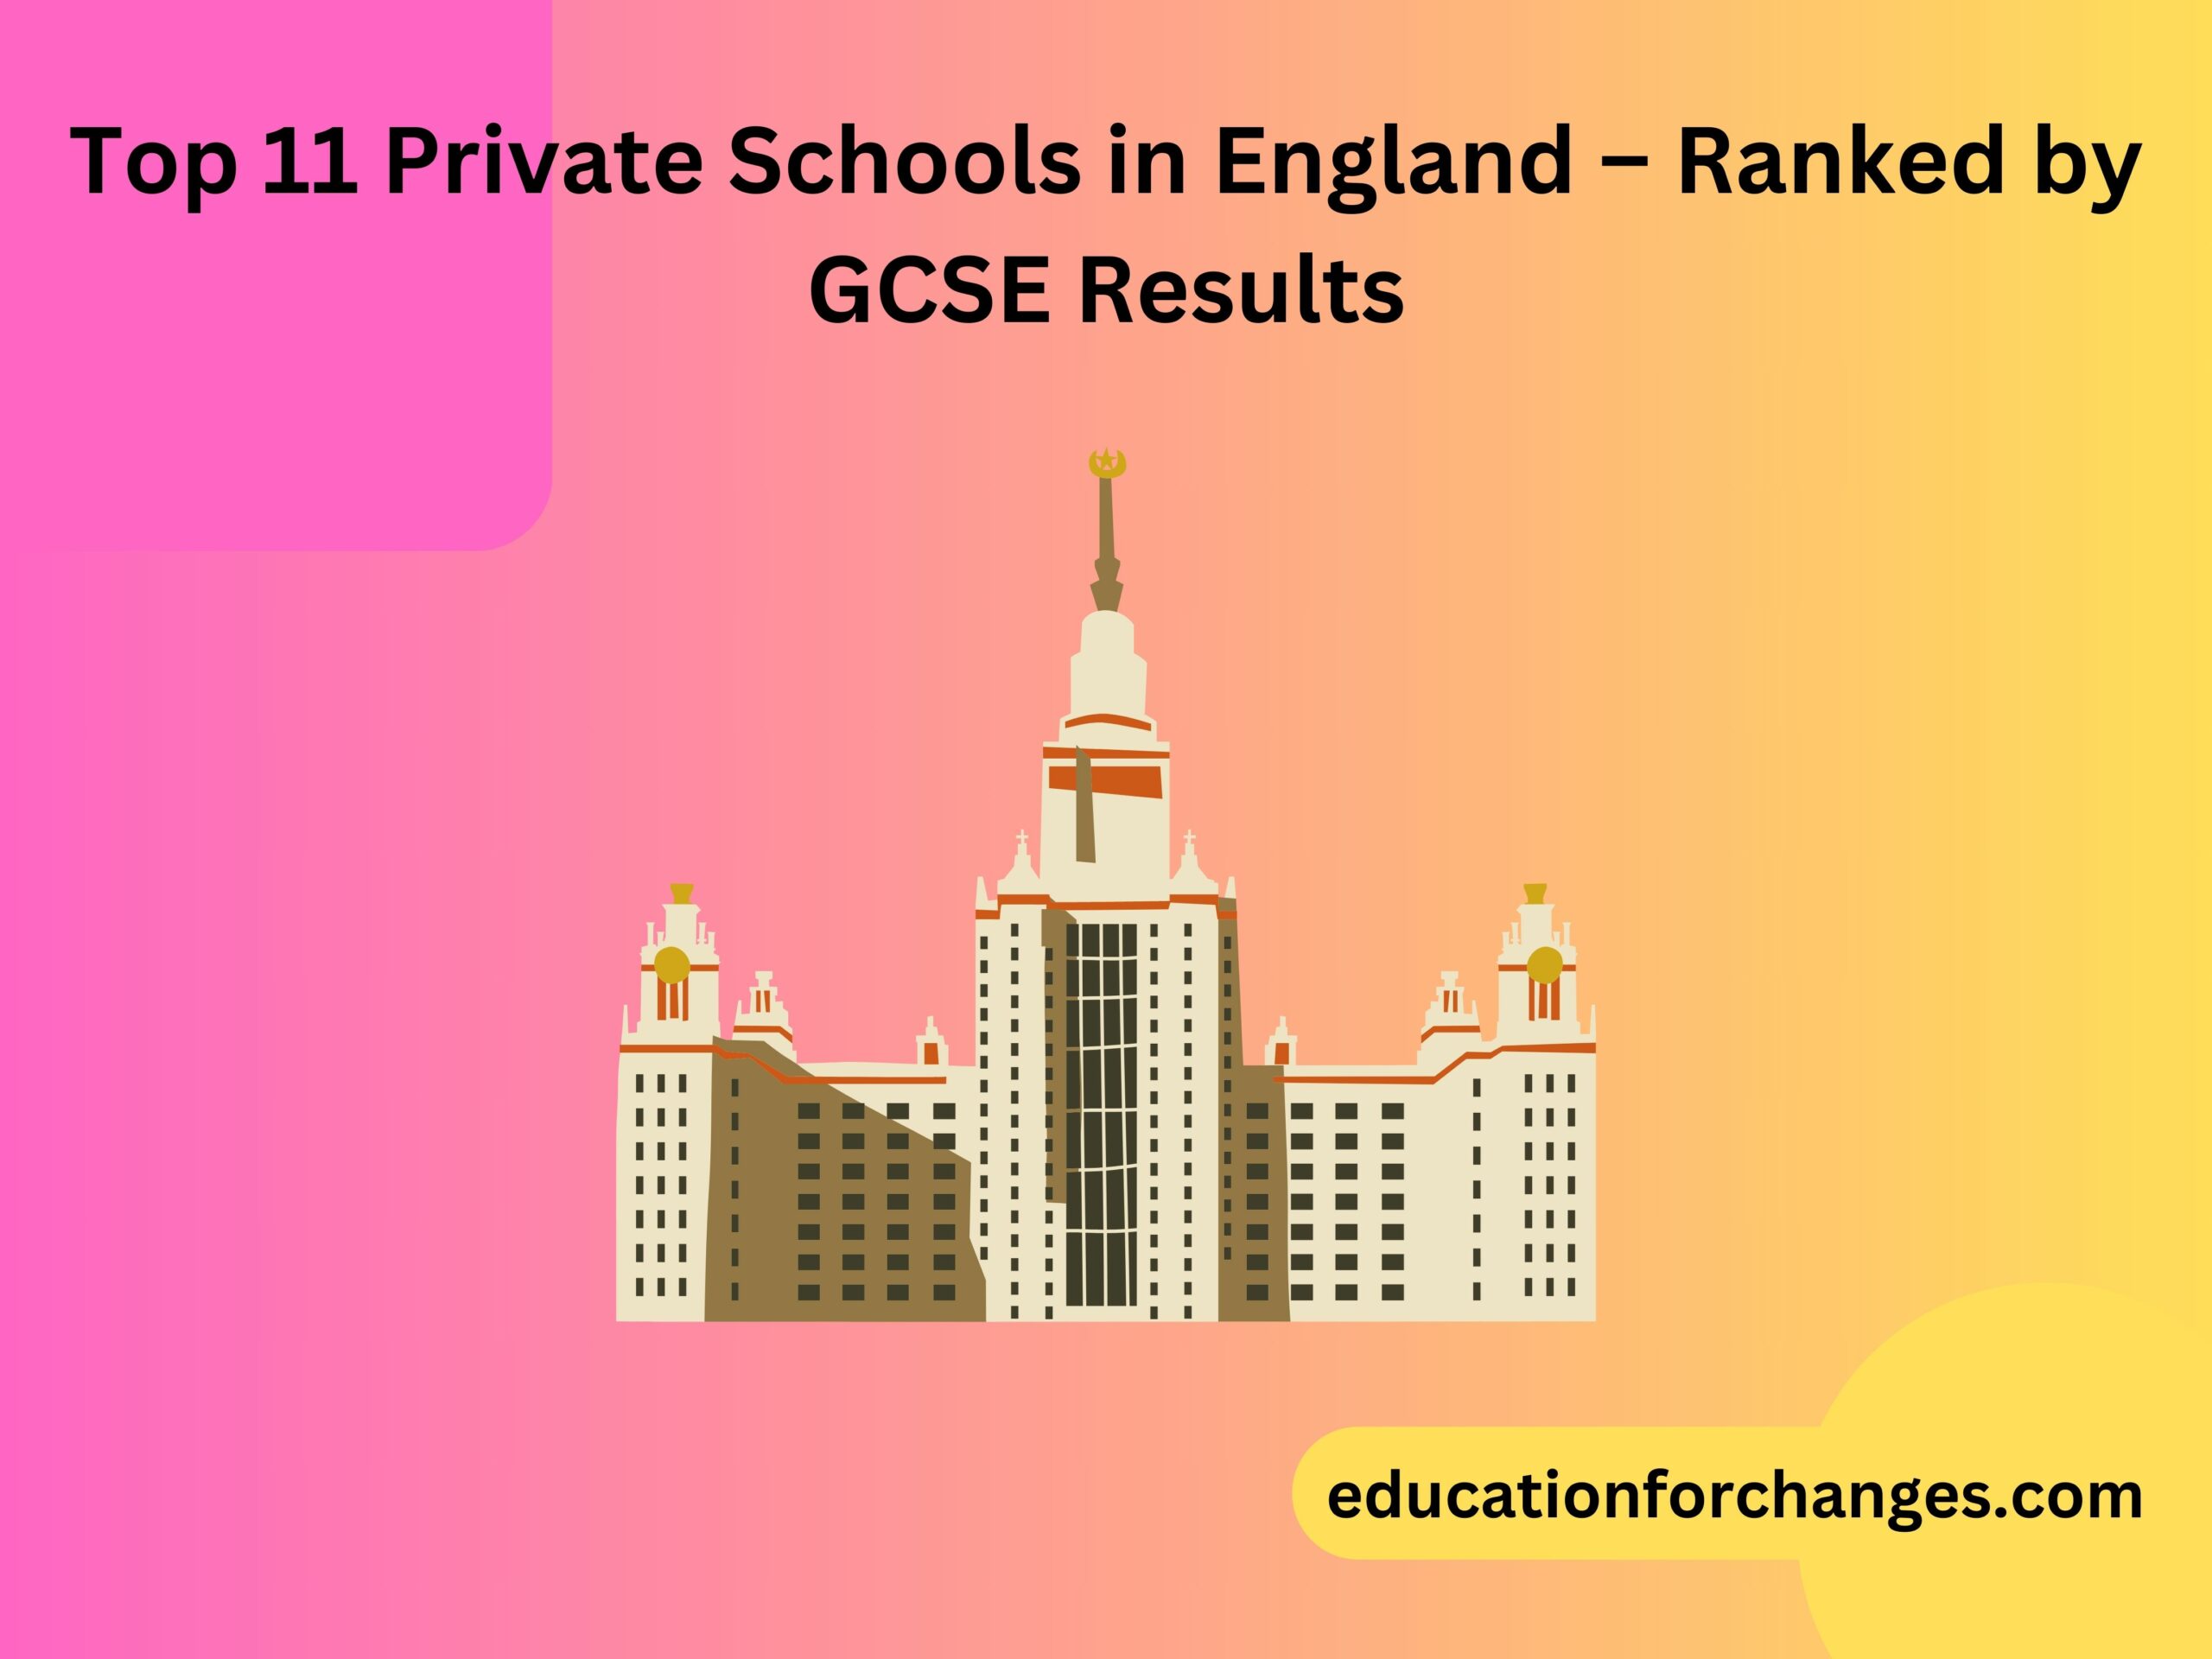 Top 11 Private Schools in England – Ranked by GCSE Results